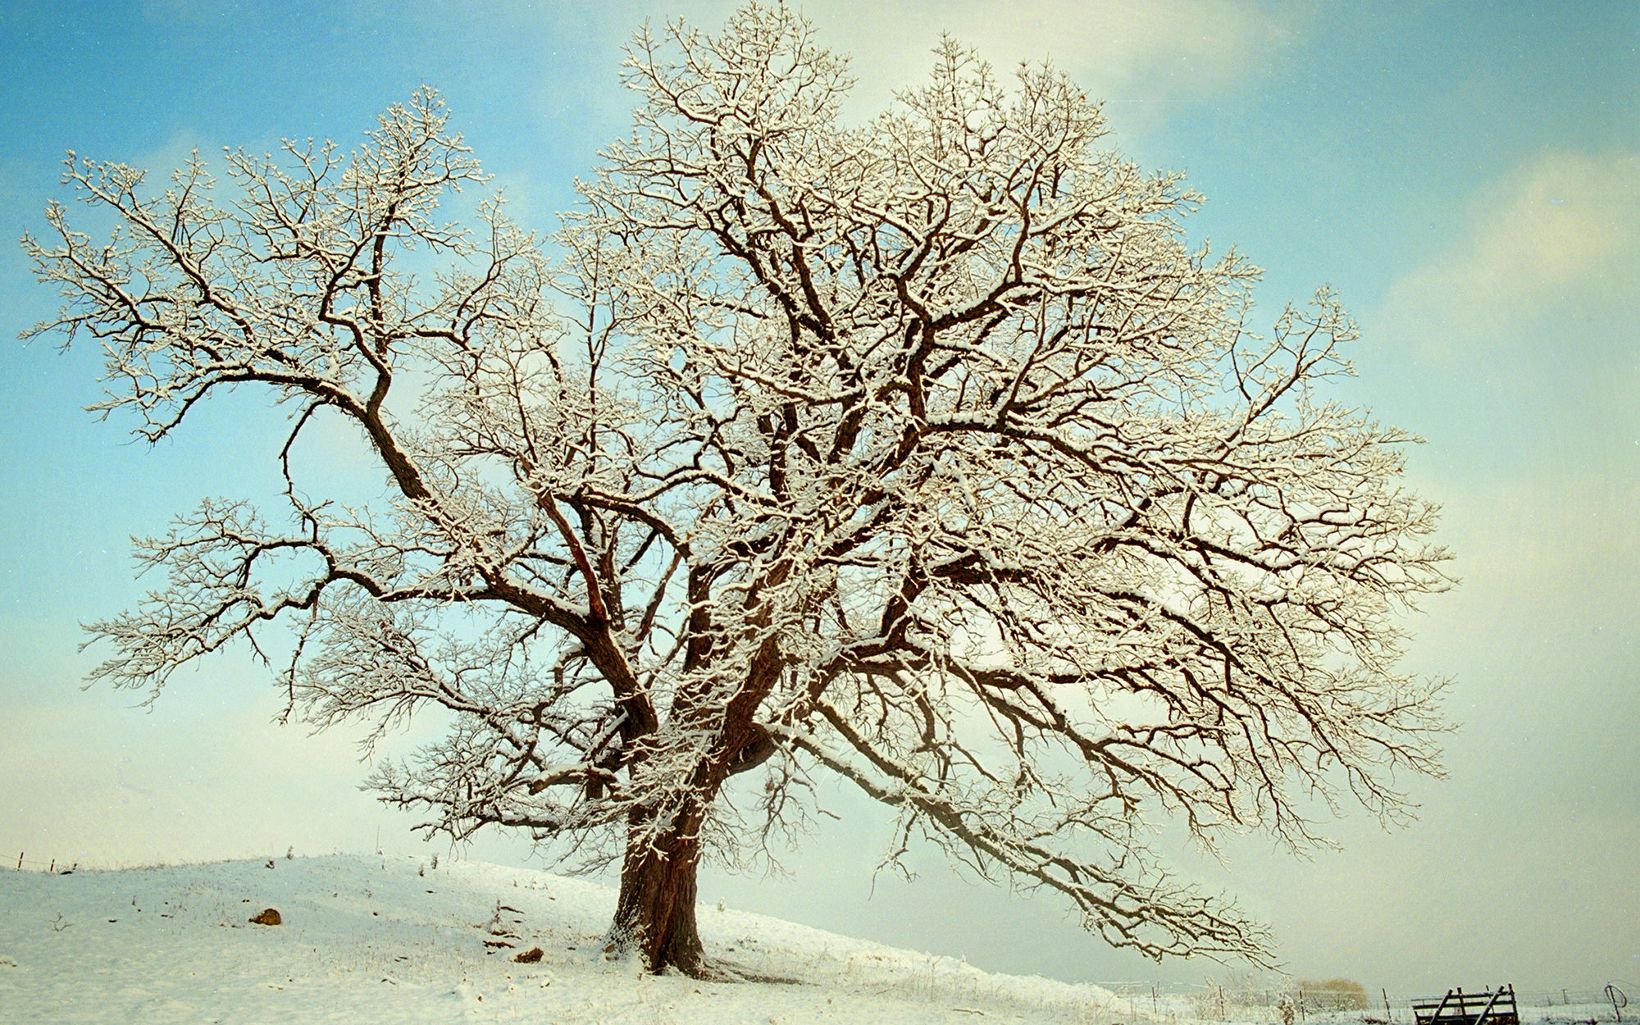 The wide-spreading branches of a large burr oak tree, standing on a small hill with blue sky overhead, are covered with snow.